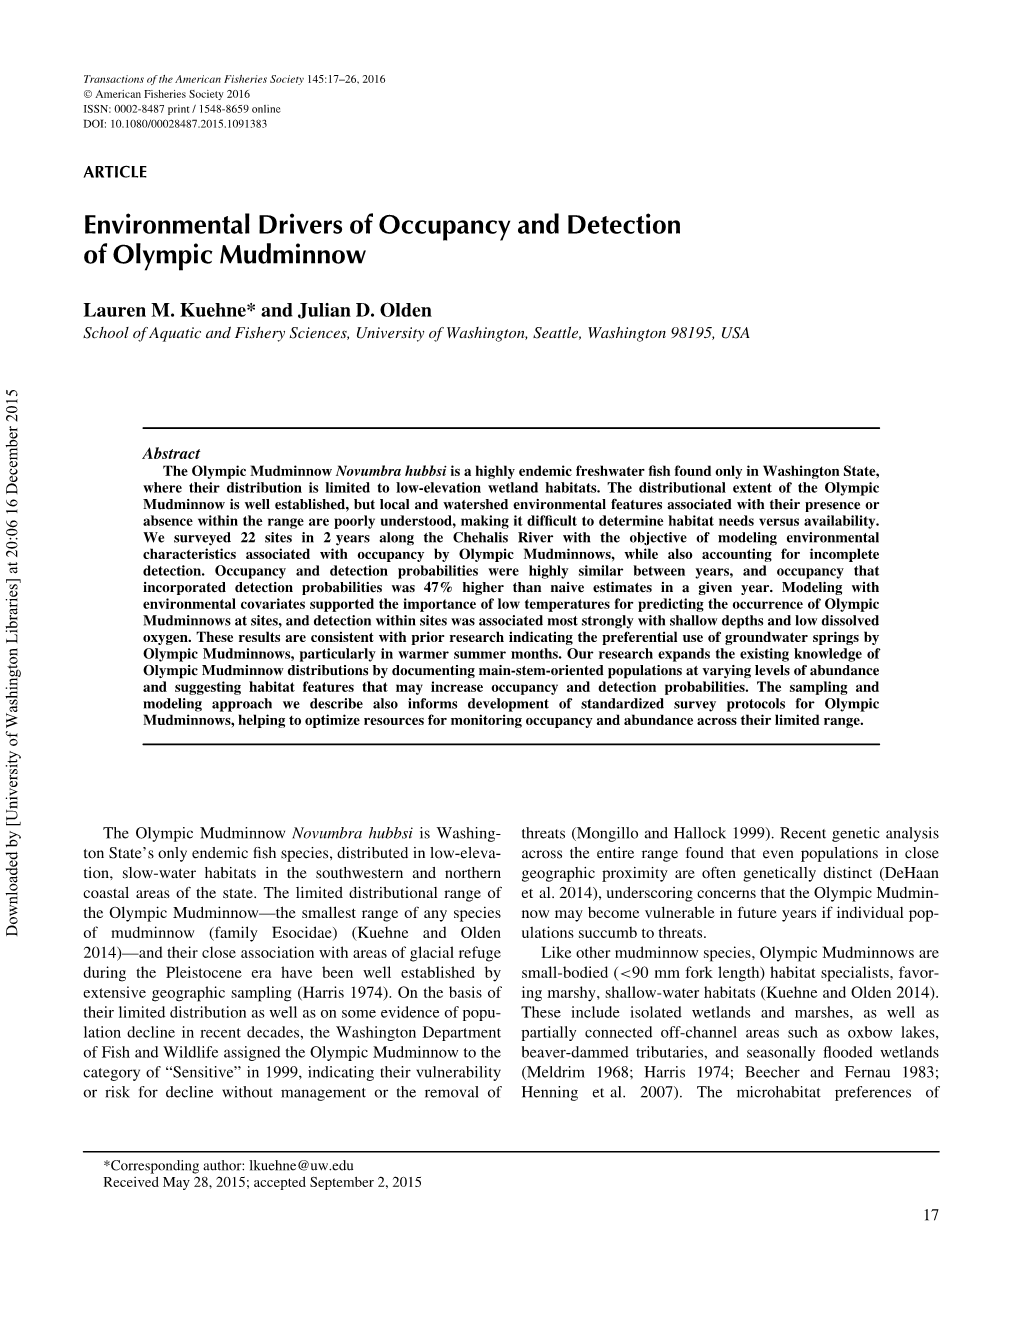 Environmental Drivers of Occupancy and Detection of Olympic Mudminnow